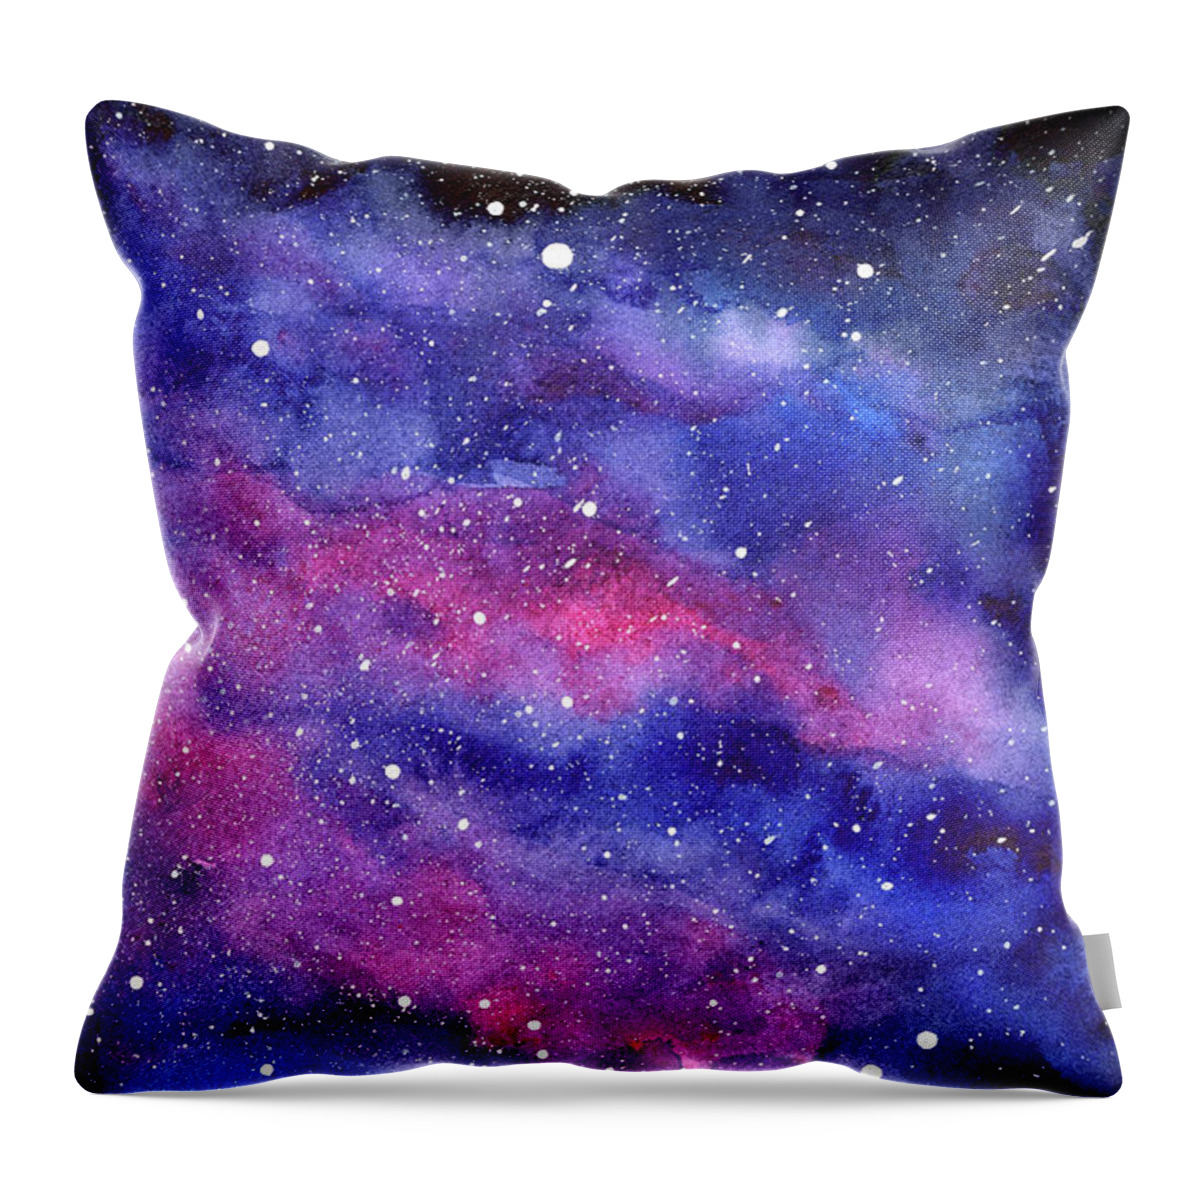 Pink Space Stars Galaxy Nebula Throw Pillow Cover w Optional Insert by Roostery